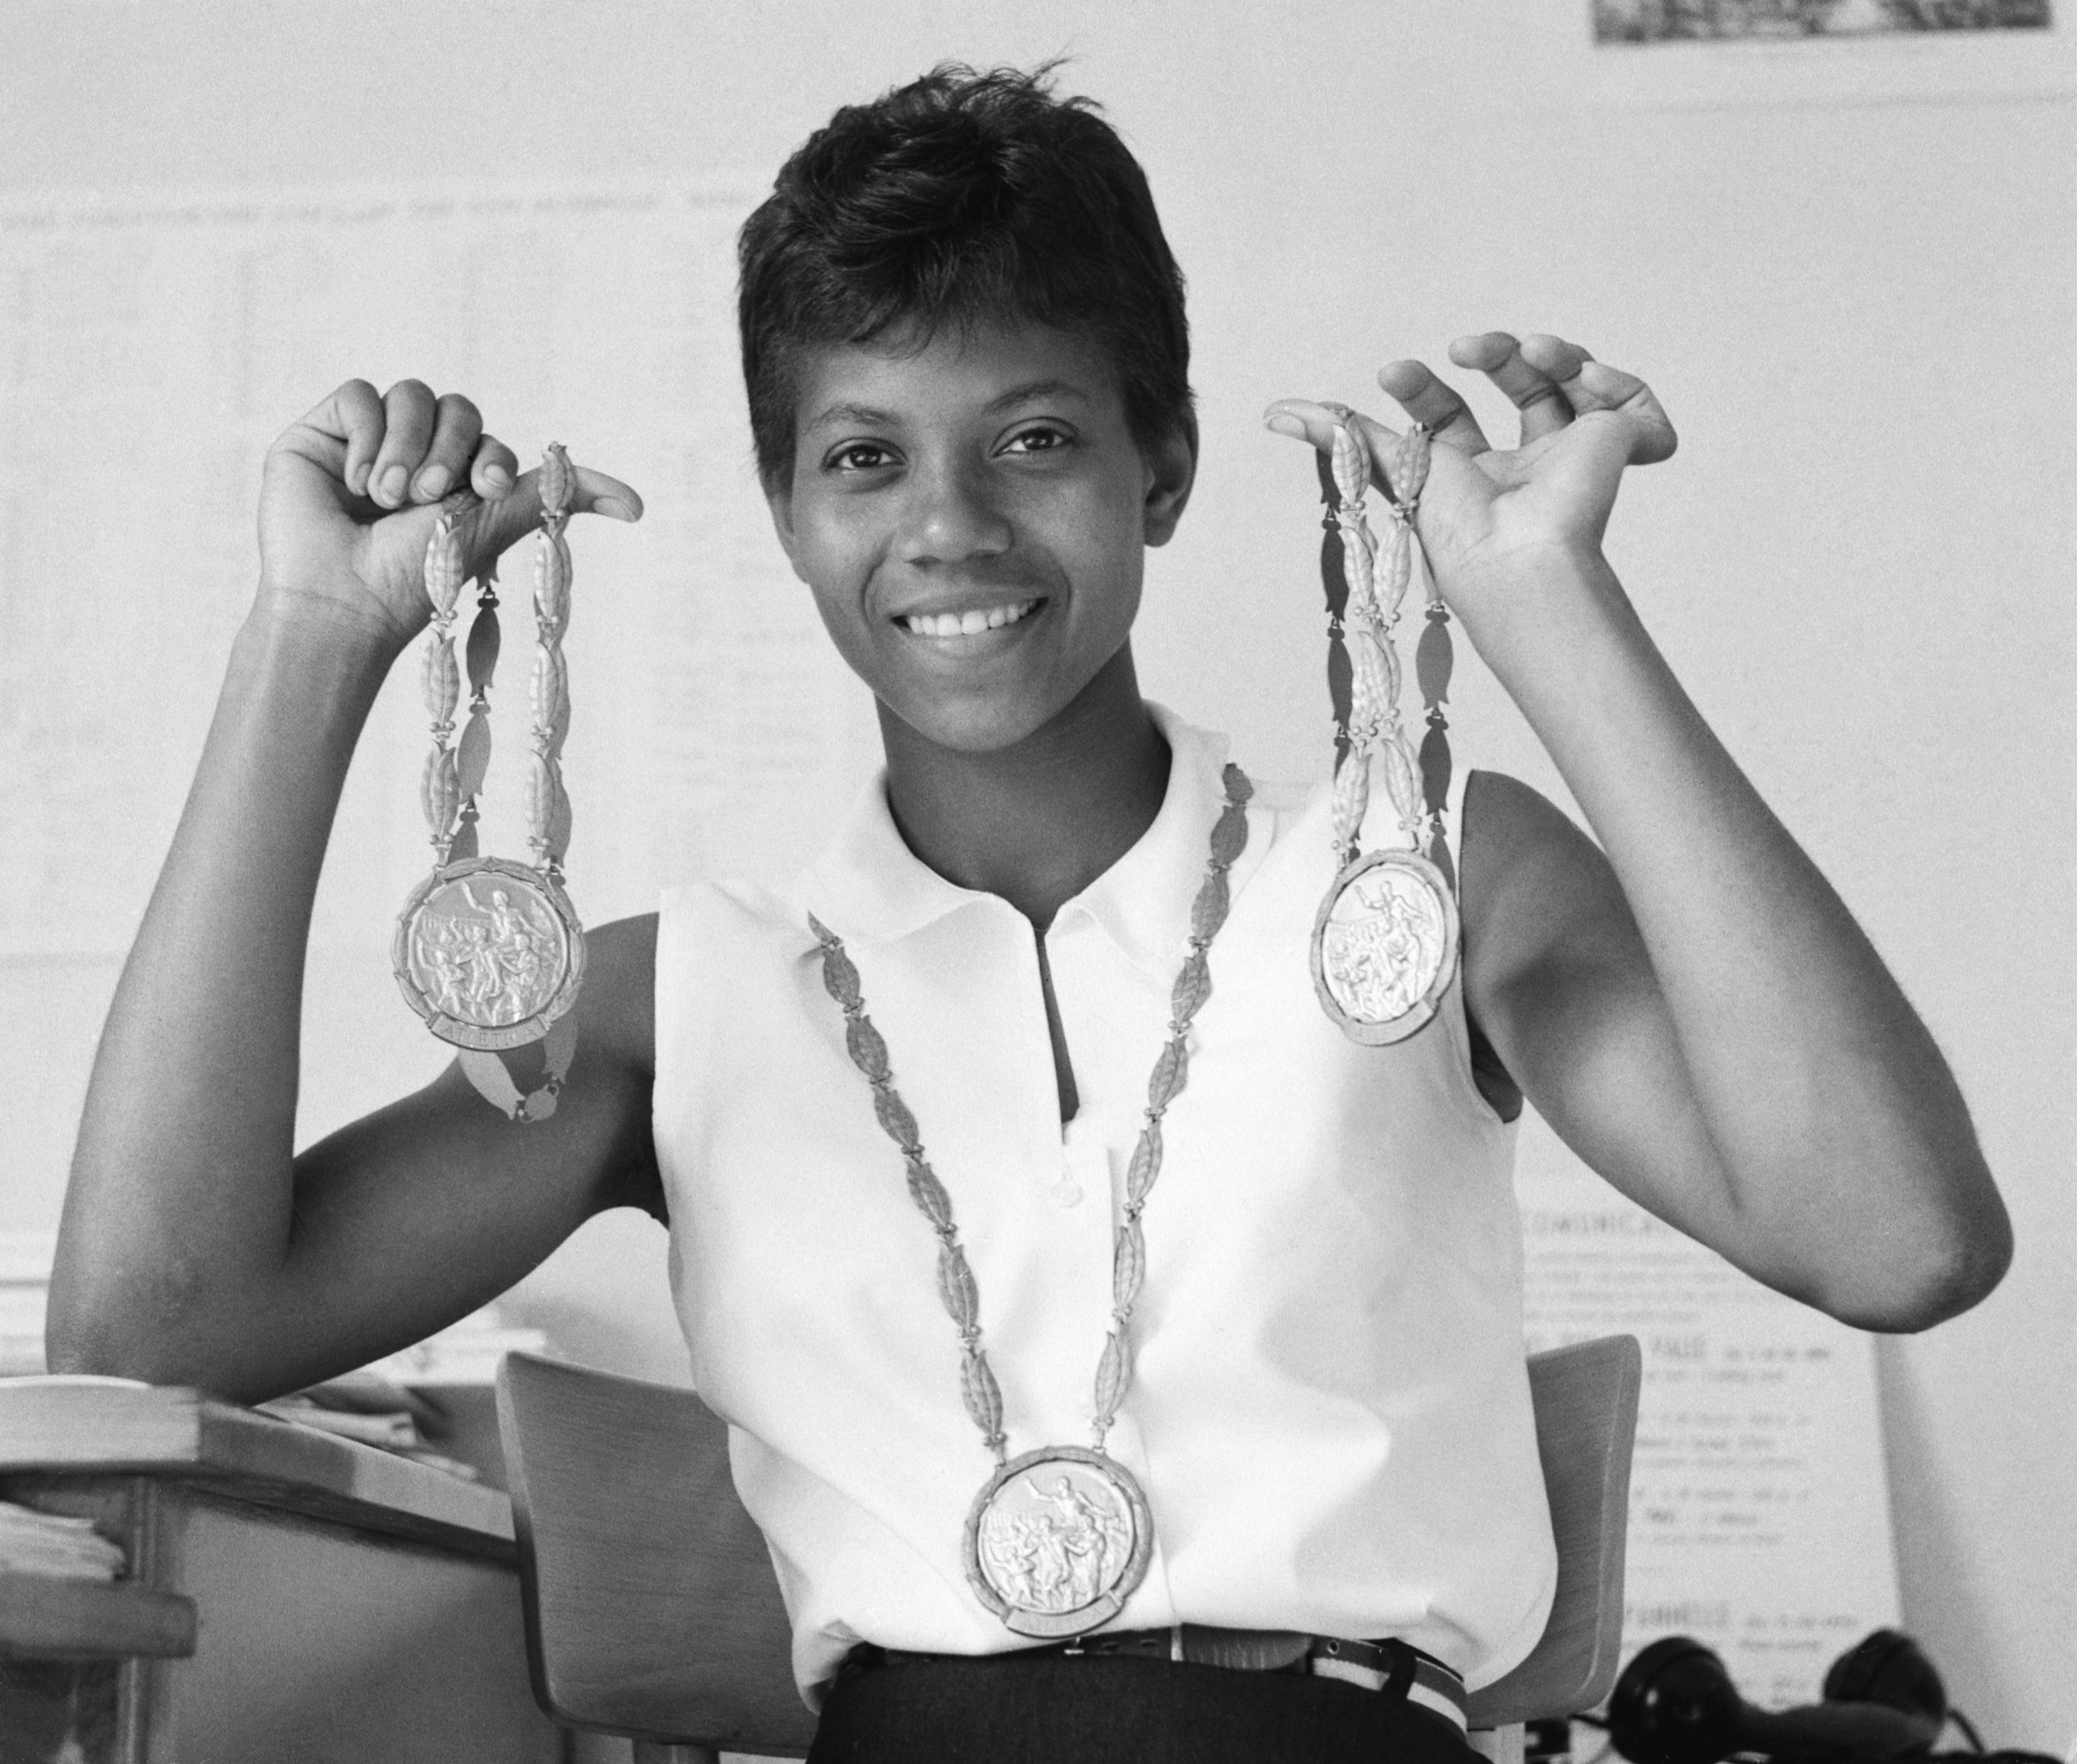 Wilma Rudolph shows off the three gold medals she won at the 1960 Olympics in Rome on September 8, 1960 | Photo: Getty Images